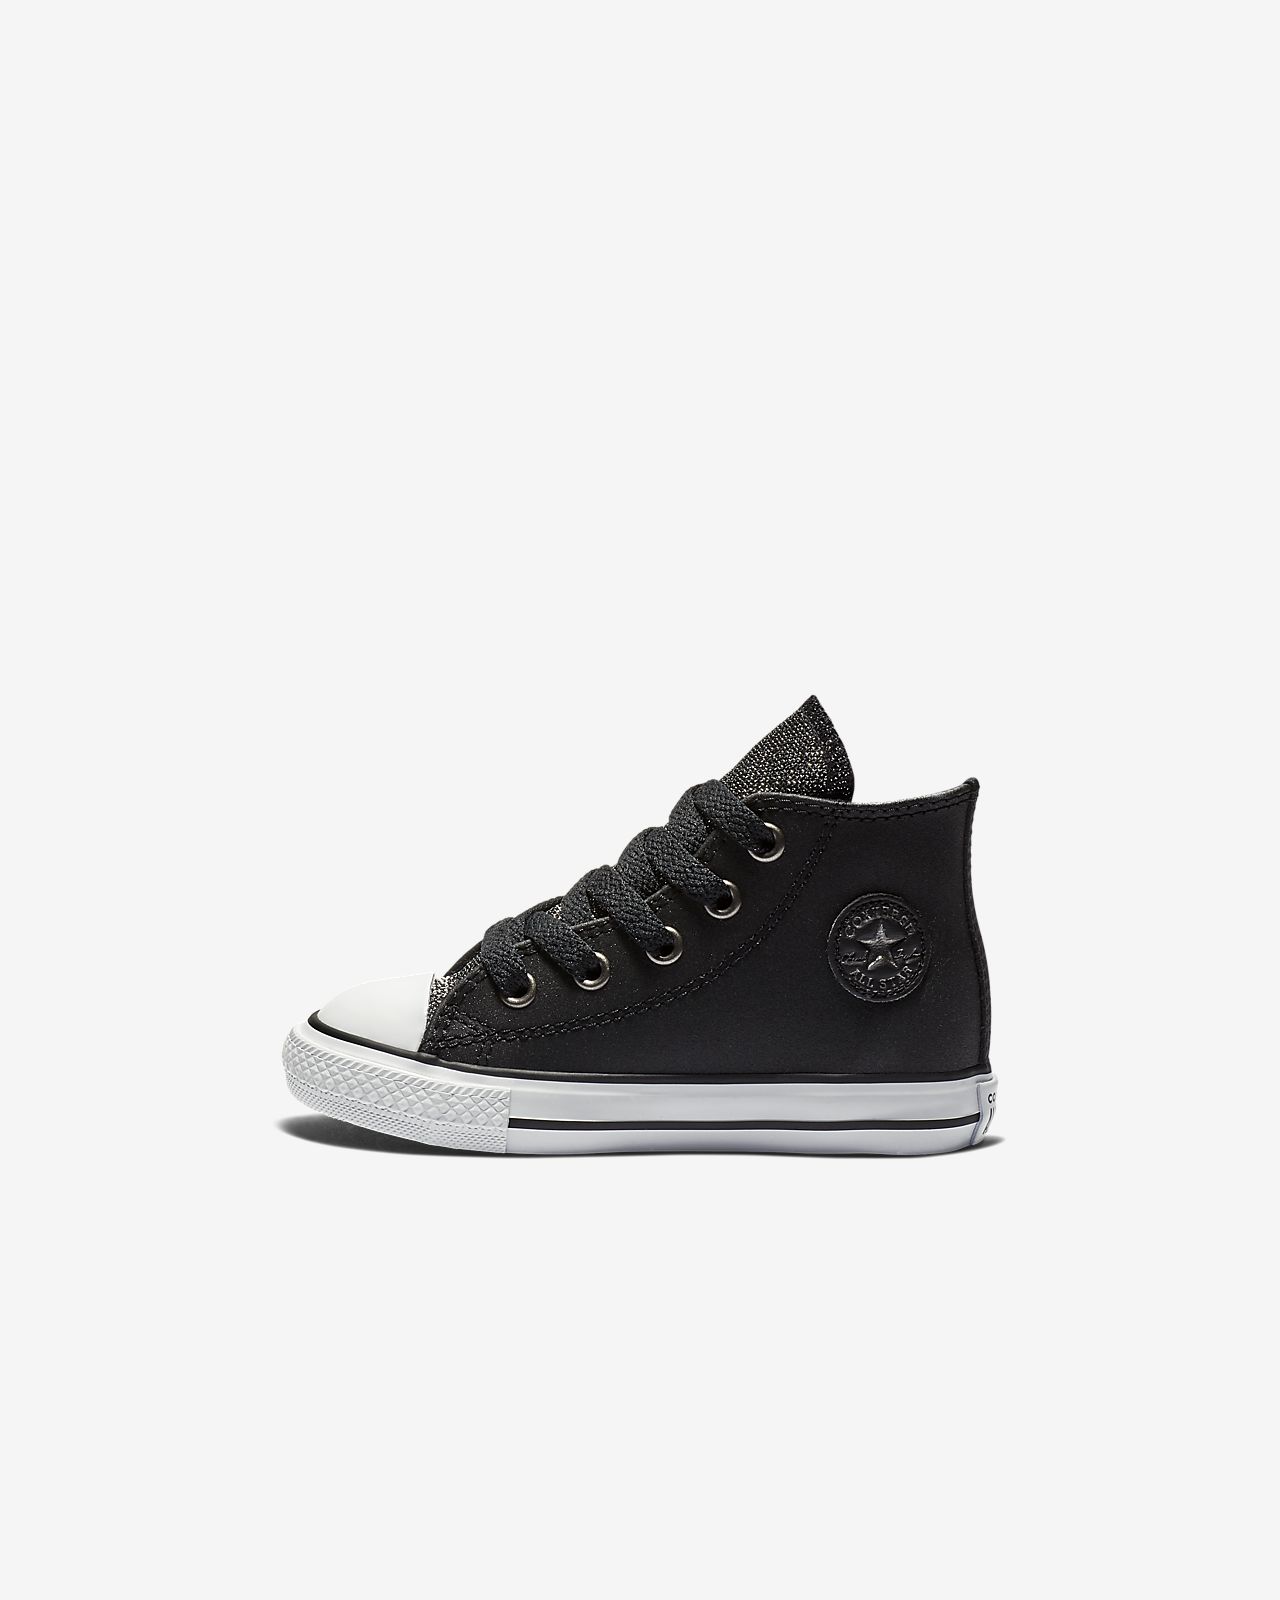 Converse Chuck Taylor All Star Graphite & Glitter Leather High Top ...